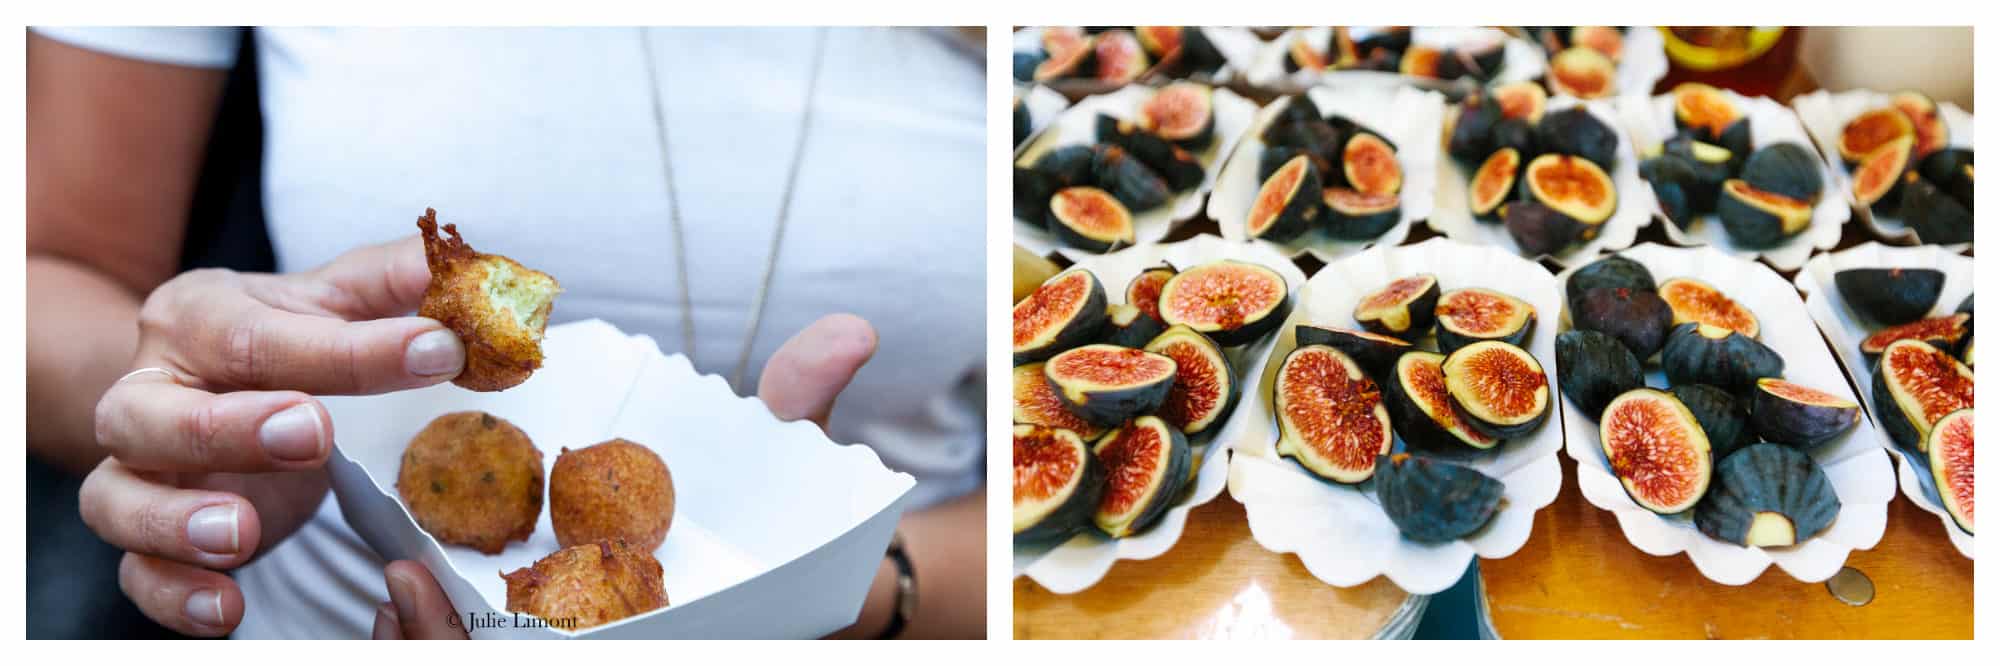 A woman tasting accras (left) and fresh figs (right) and Le Food Market in Paris.